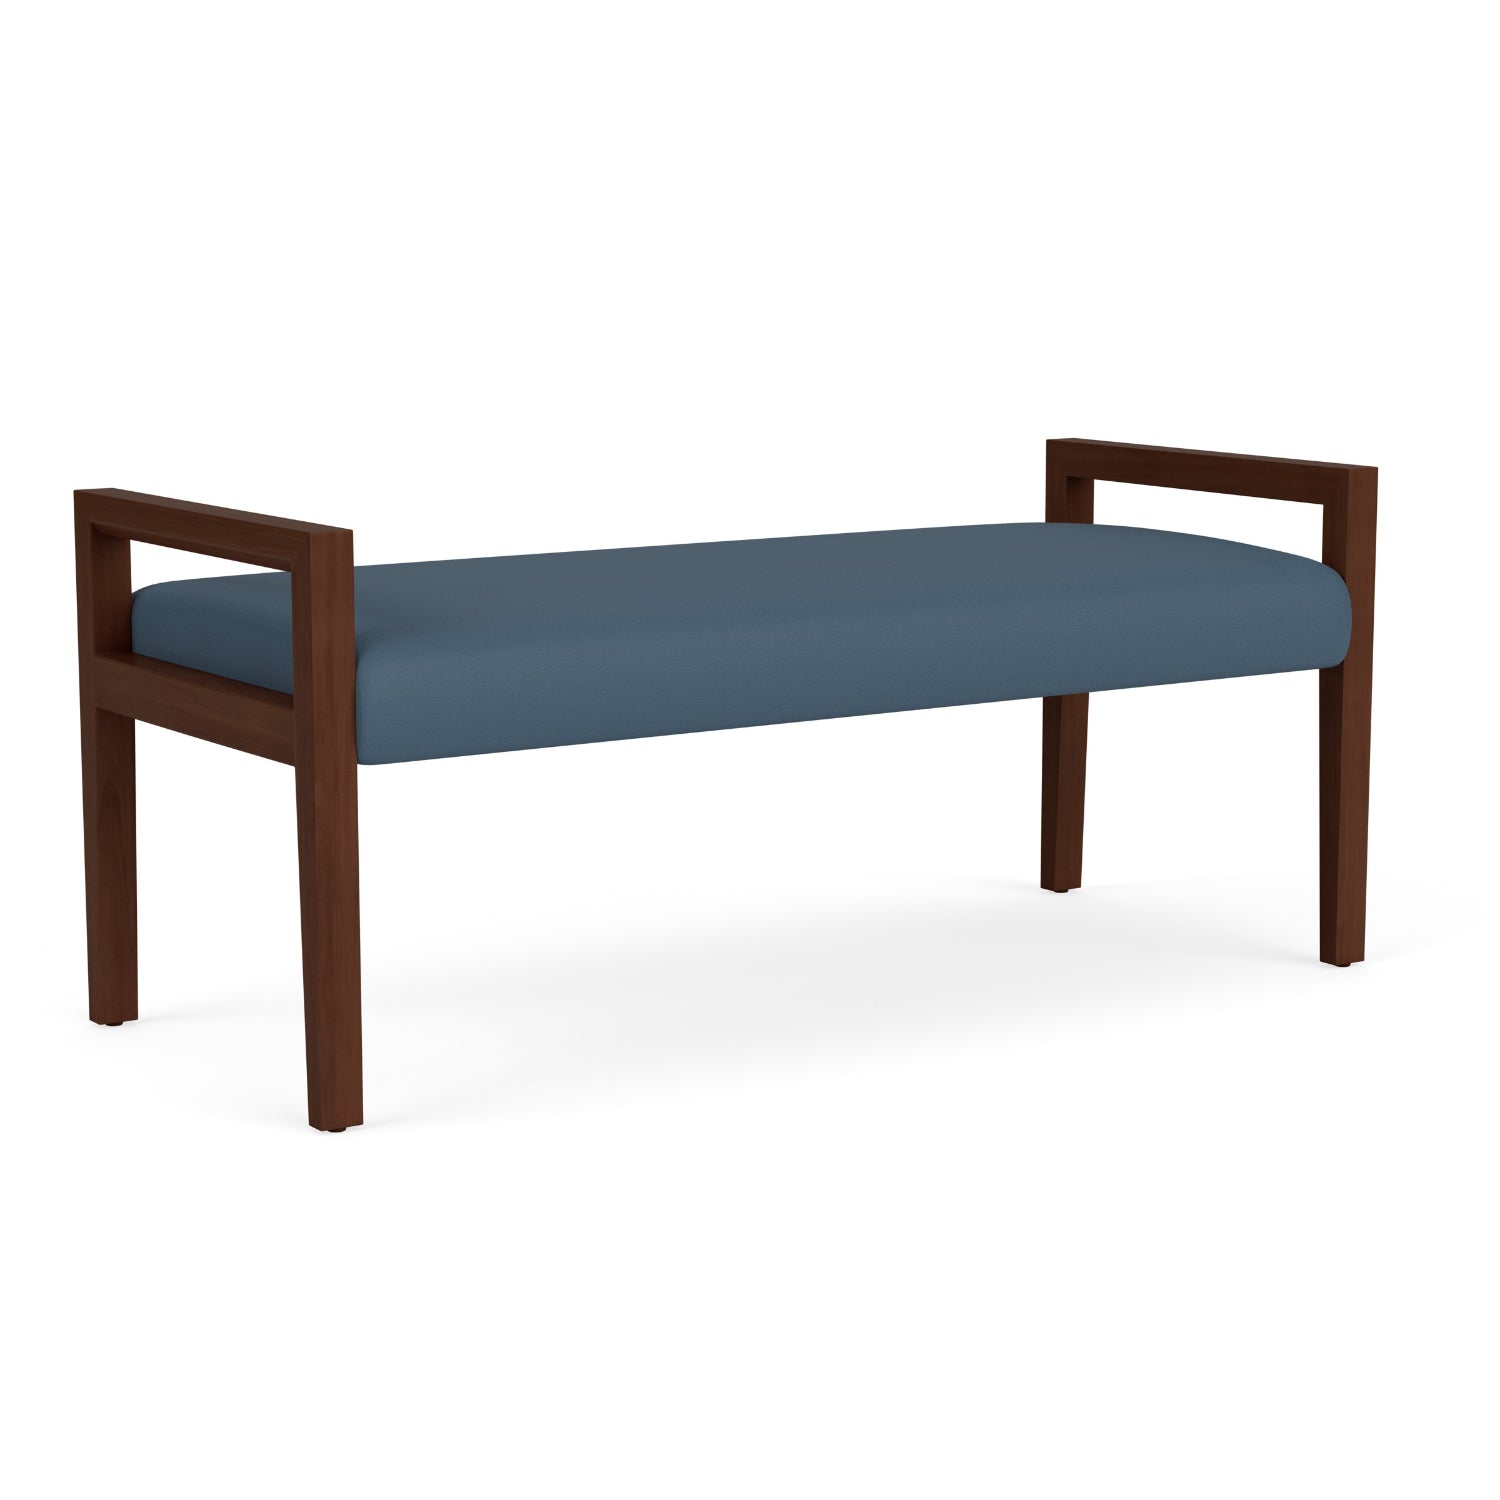 Brooklyn Collection Reception Seating, 2 Seat Bench, Standard Vinyl Upholstery, FREE SHIPPING